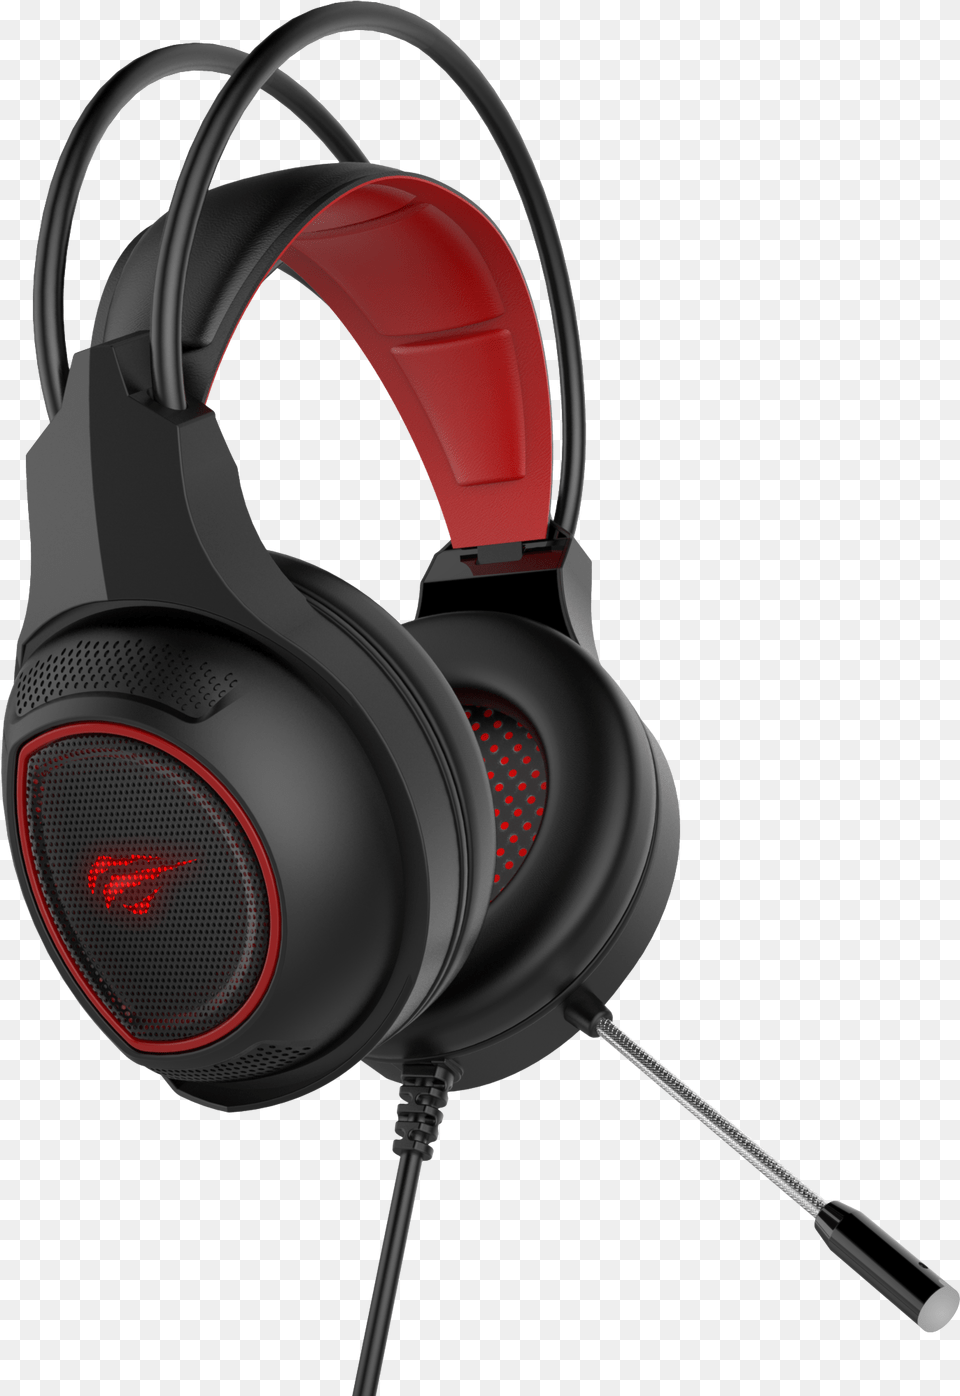 Auriculares Gaming Hv H2239d Con Micrfono Cable Havit Hv H2239d Gaming Headphone, Electronics, Headphones Free Png